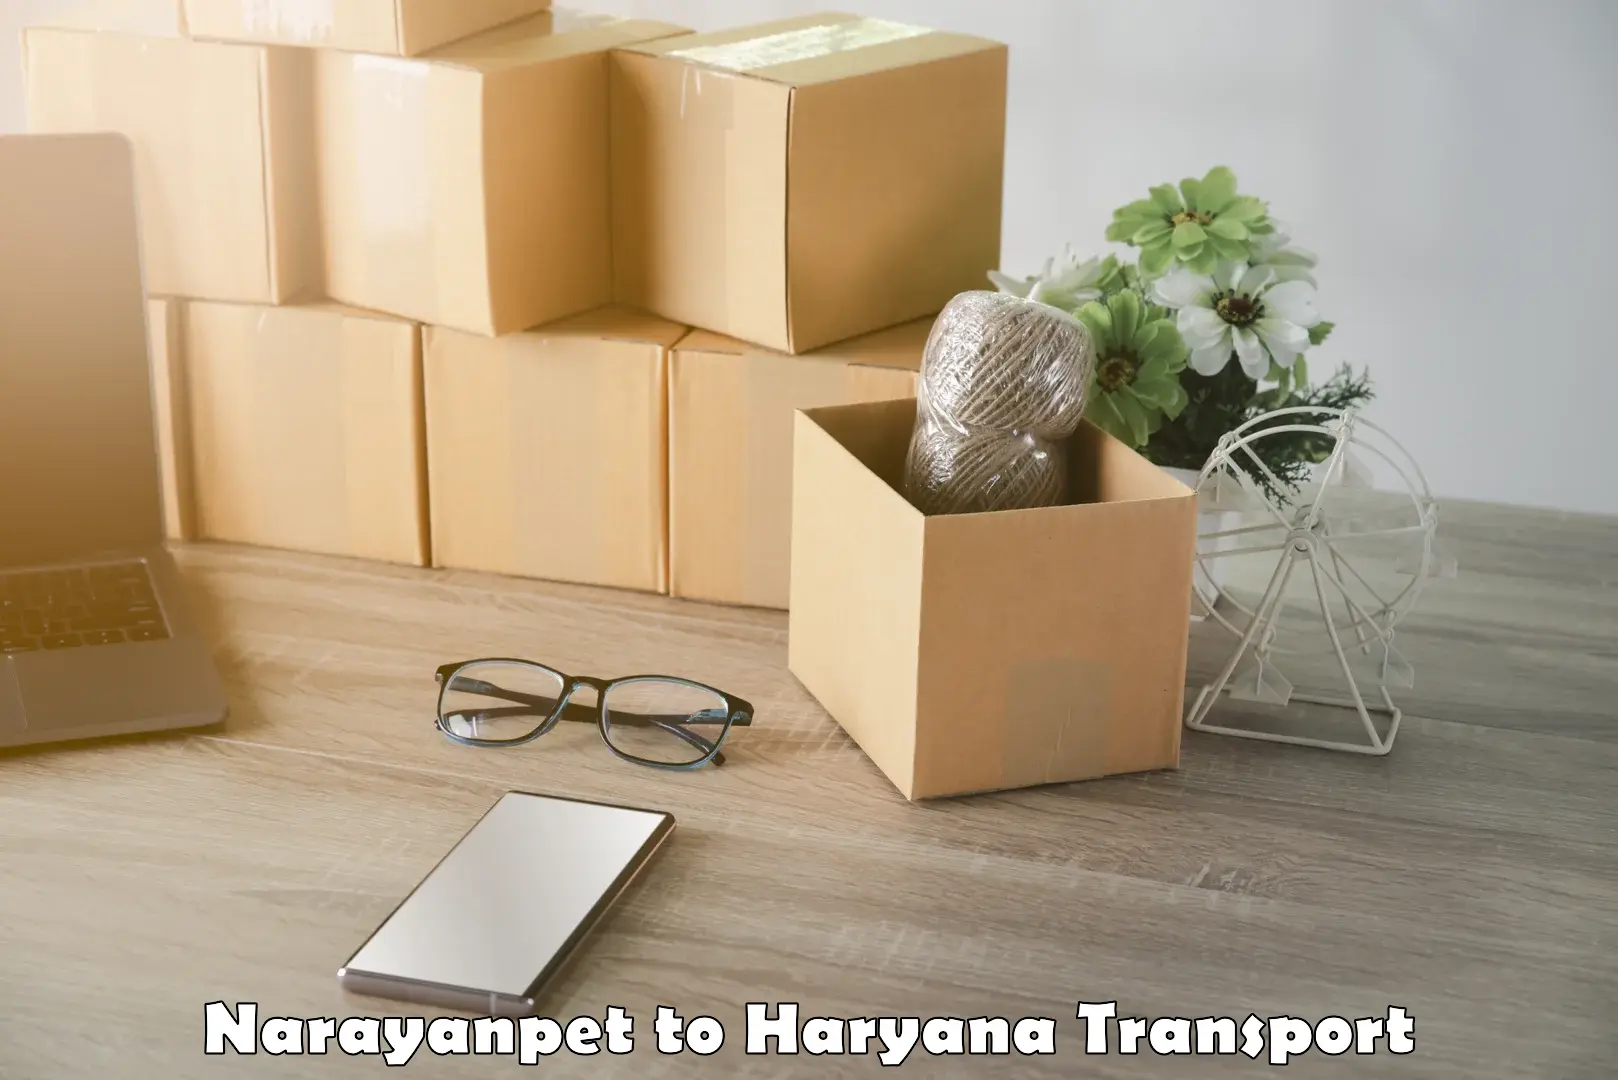 Cargo transport services Narayanpet to NCR Haryana